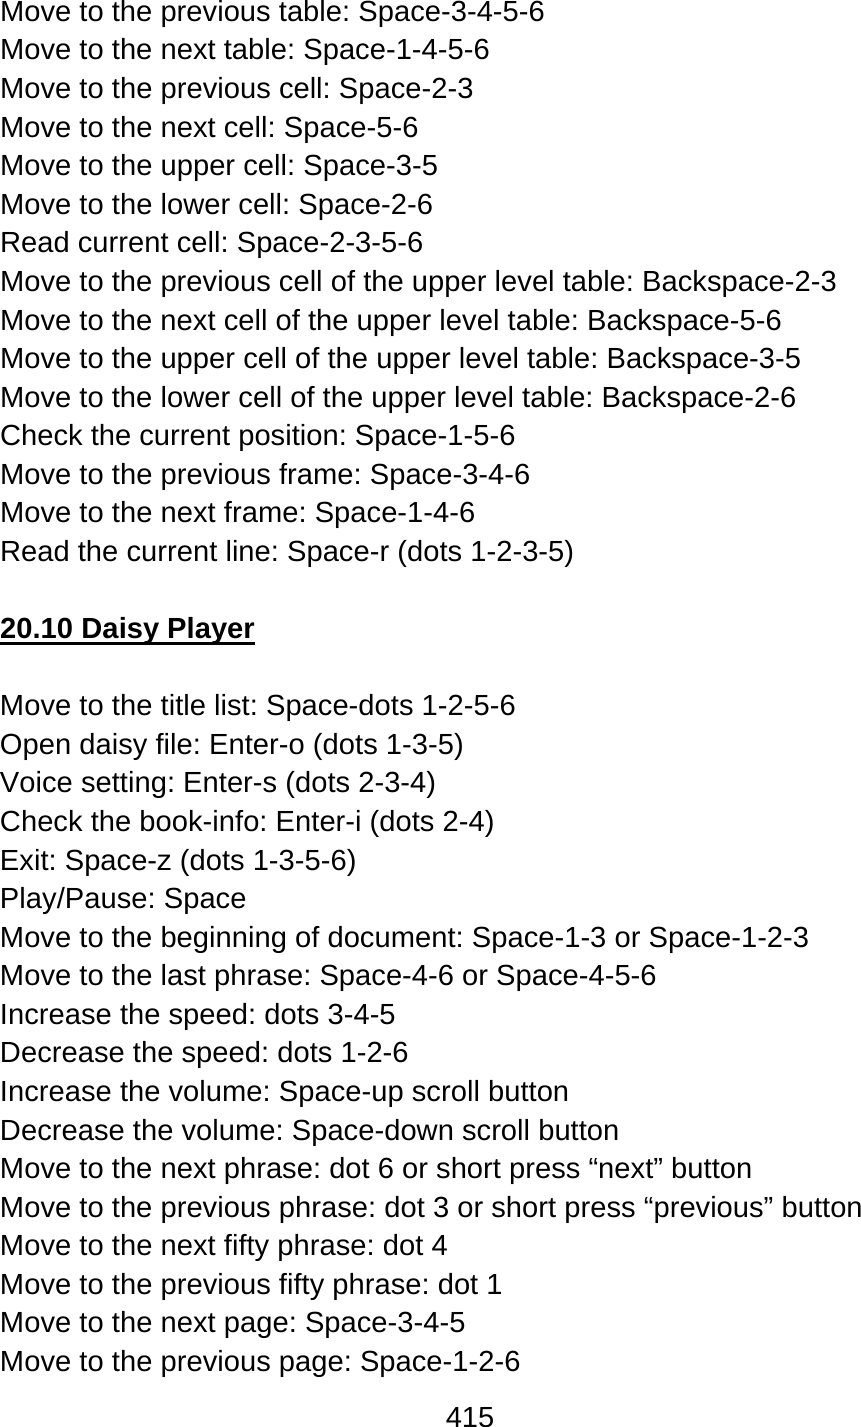 415  Move to the previous table: Space-3-4-5-6 Move to the next table: Space-1-4-5-6 Move to the previous cell: Space-2-3 Move to the next cell: Space-5-6 Move to the upper cell: Space-3-5 Move to the lower cell: Space-2-6 Read current cell: Space-2-3-5-6 Move to the previous cell of the upper level table: Backspace-2-3 Move to the next cell of the upper level table: Backspace-5-6 Move to the upper cell of the upper level table: Backspace-3-5 Move to the lower cell of the upper level table: Backspace-2-6 Check the current position: Space-1-5-6 Move to the previous frame: Space-3-4-6 Move to the next frame: Space-1-4-6 Read the current line: Space-r (dots 1-2-3-5)  20.10 Daisy Player  Move to the title list: Space-dots 1-2-5-6 Open daisy file: Enter-o (dots 1-3-5) Voice setting: Enter-s (dots 2-3-4) Check the book-info: Enter-i (dots 2-4) Exit: Space-z (dots 1-3-5-6) Play/Pause: Space Move to the beginning of document: Space-1-3 or Space-1-2-3 Move to the last phrase: Space-4-6 or Space-4-5-6 Increase the speed: dots 3-4-5 Decrease the speed: dots 1-2-6 Increase the volume: Space-up scroll button Decrease the volume: Space-down scroll button Move to the next phrase: dot 6 or short press “next” button Move to the previous phrase: dot 3 or short press “previous” button Move to the next fifty phrase: dot 4 Move to the previous fifty phrase: dot 1 Move to the next page: Space-3-4-5 Move to the previous page: Space-1-2-6 